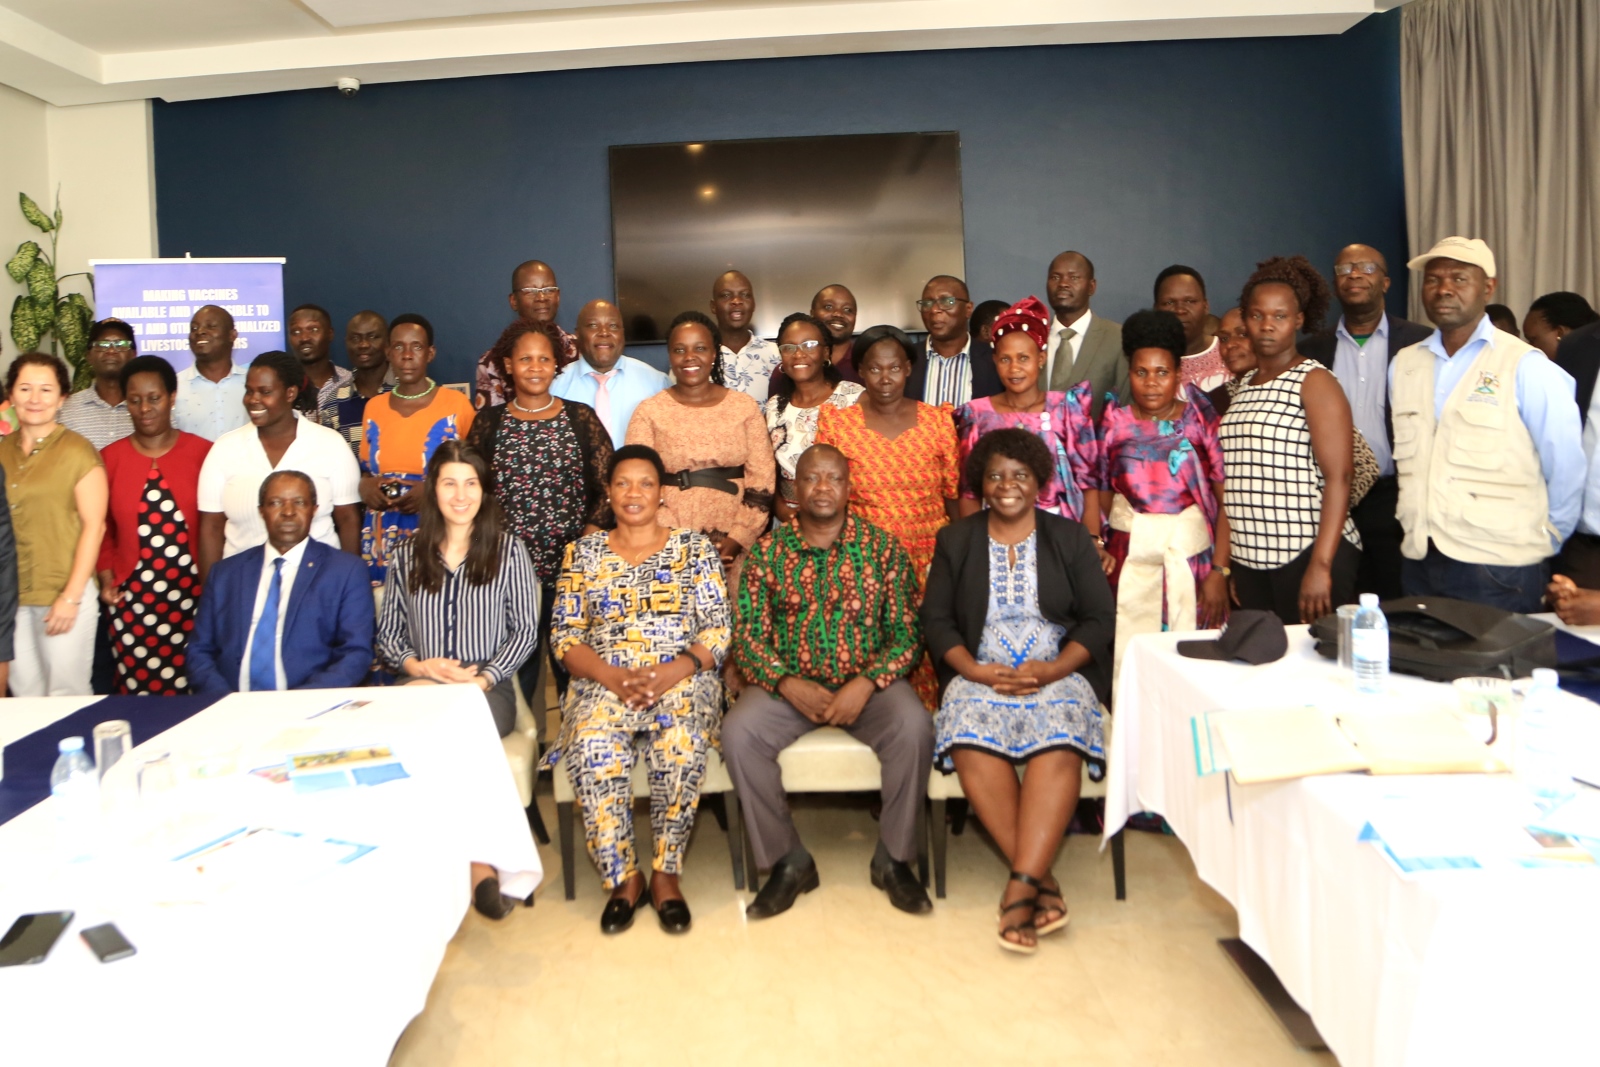 Participants including Hon. Janet Akech Okori-moe (Seated C), Prof. William Bazeyo (Seated L) that attended the Livestock Vaccine Innovation Fund (LVIF) project multi-stakeholders meeting convened at Golden Tulip Hotel, Kampala, Uganda on Monday 5th March 2023 pose for a group photo.